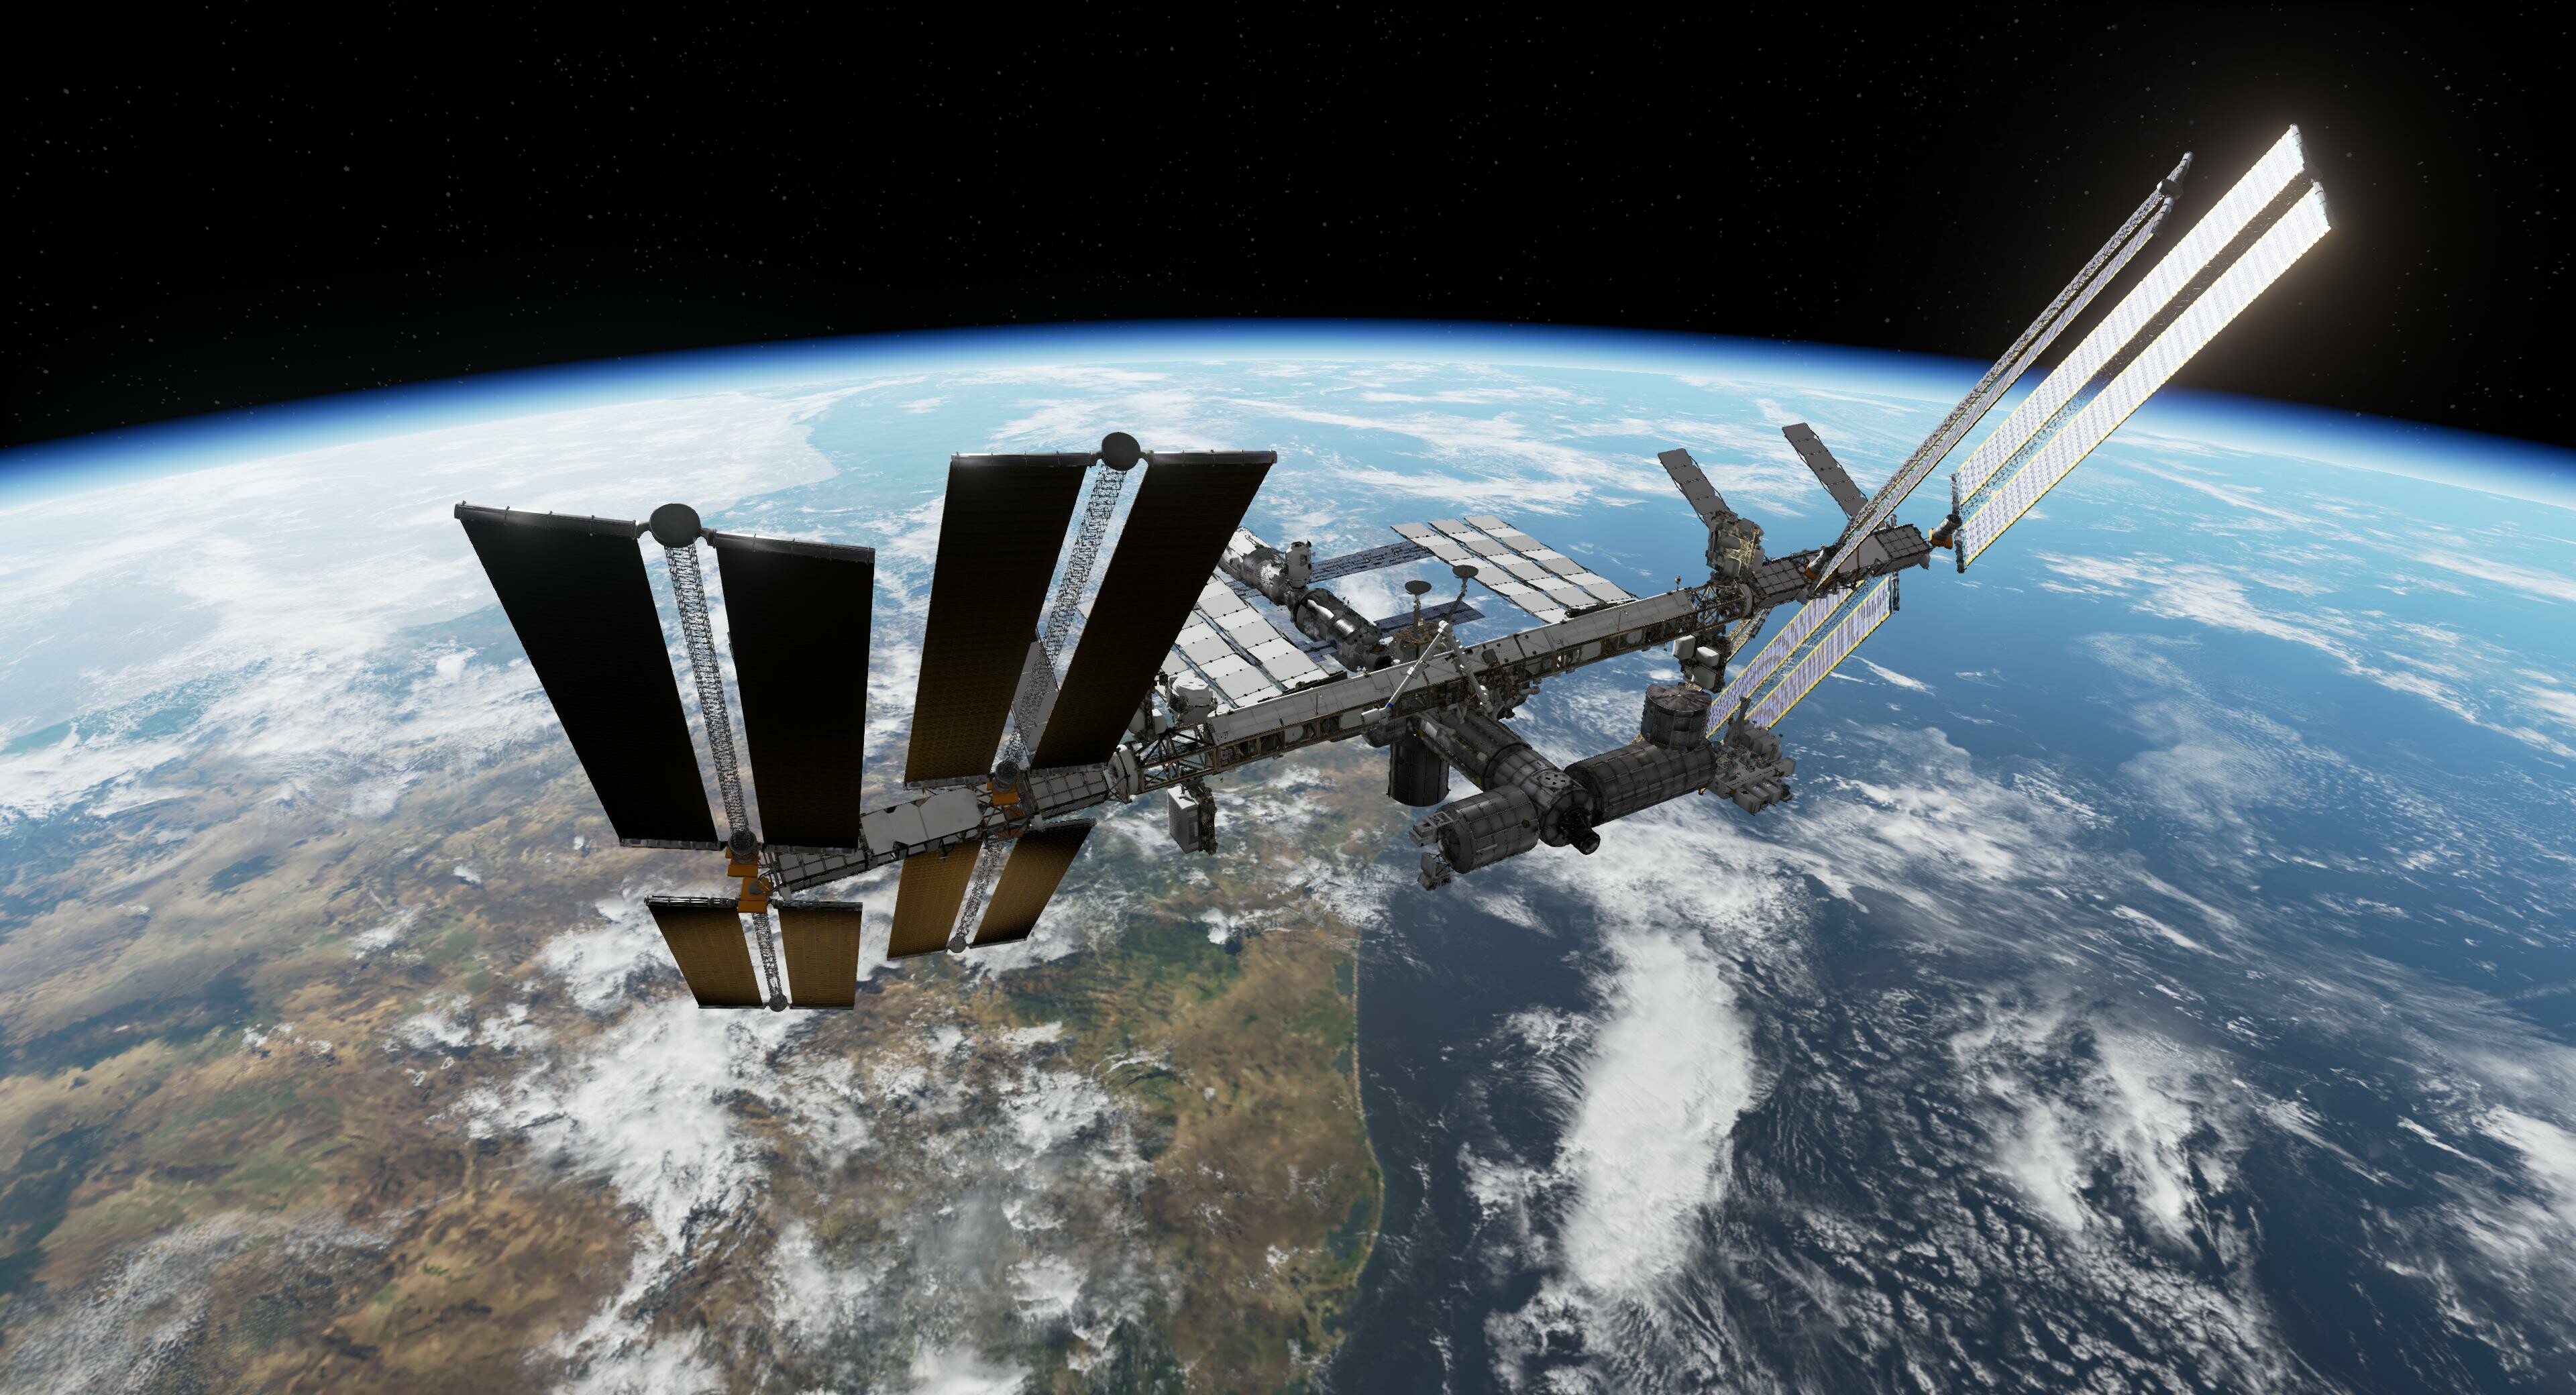 International Space Station: ISS, in orbit since 1998, Hosts multiple countries on board. 3840x2080 HD Wallpaper.